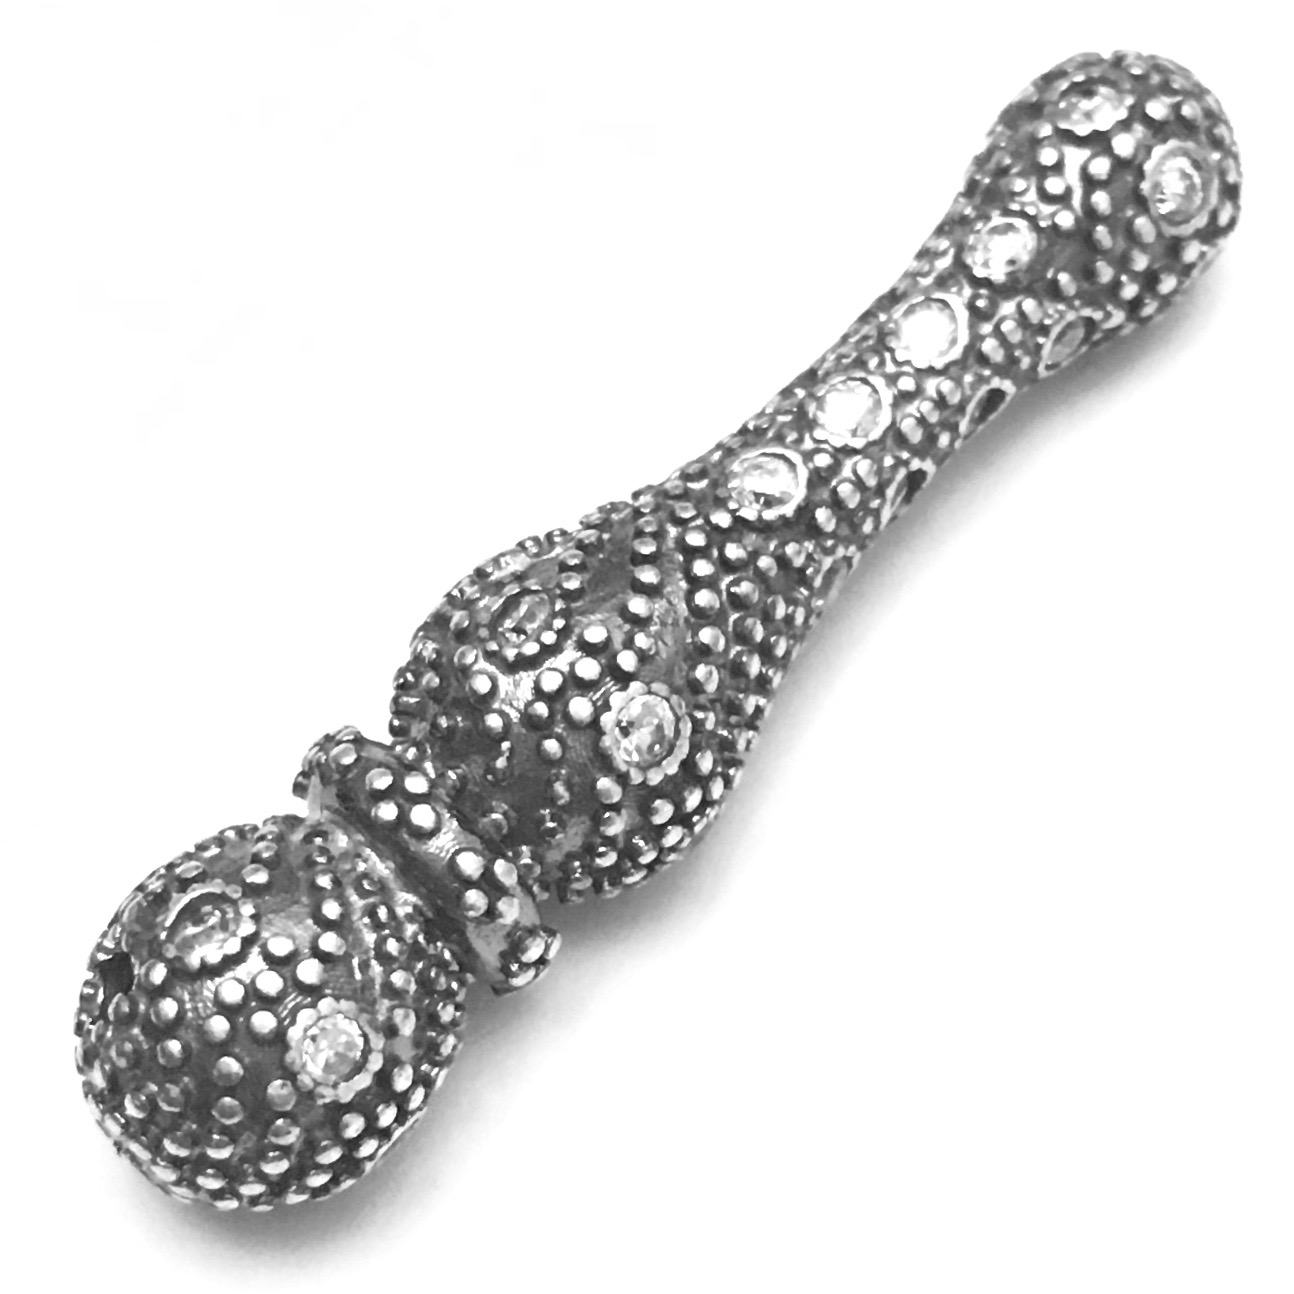 Cubic Zirconia studded Silver Imame For Tasbih 4 cm ID # 6924 - Click Image to Close